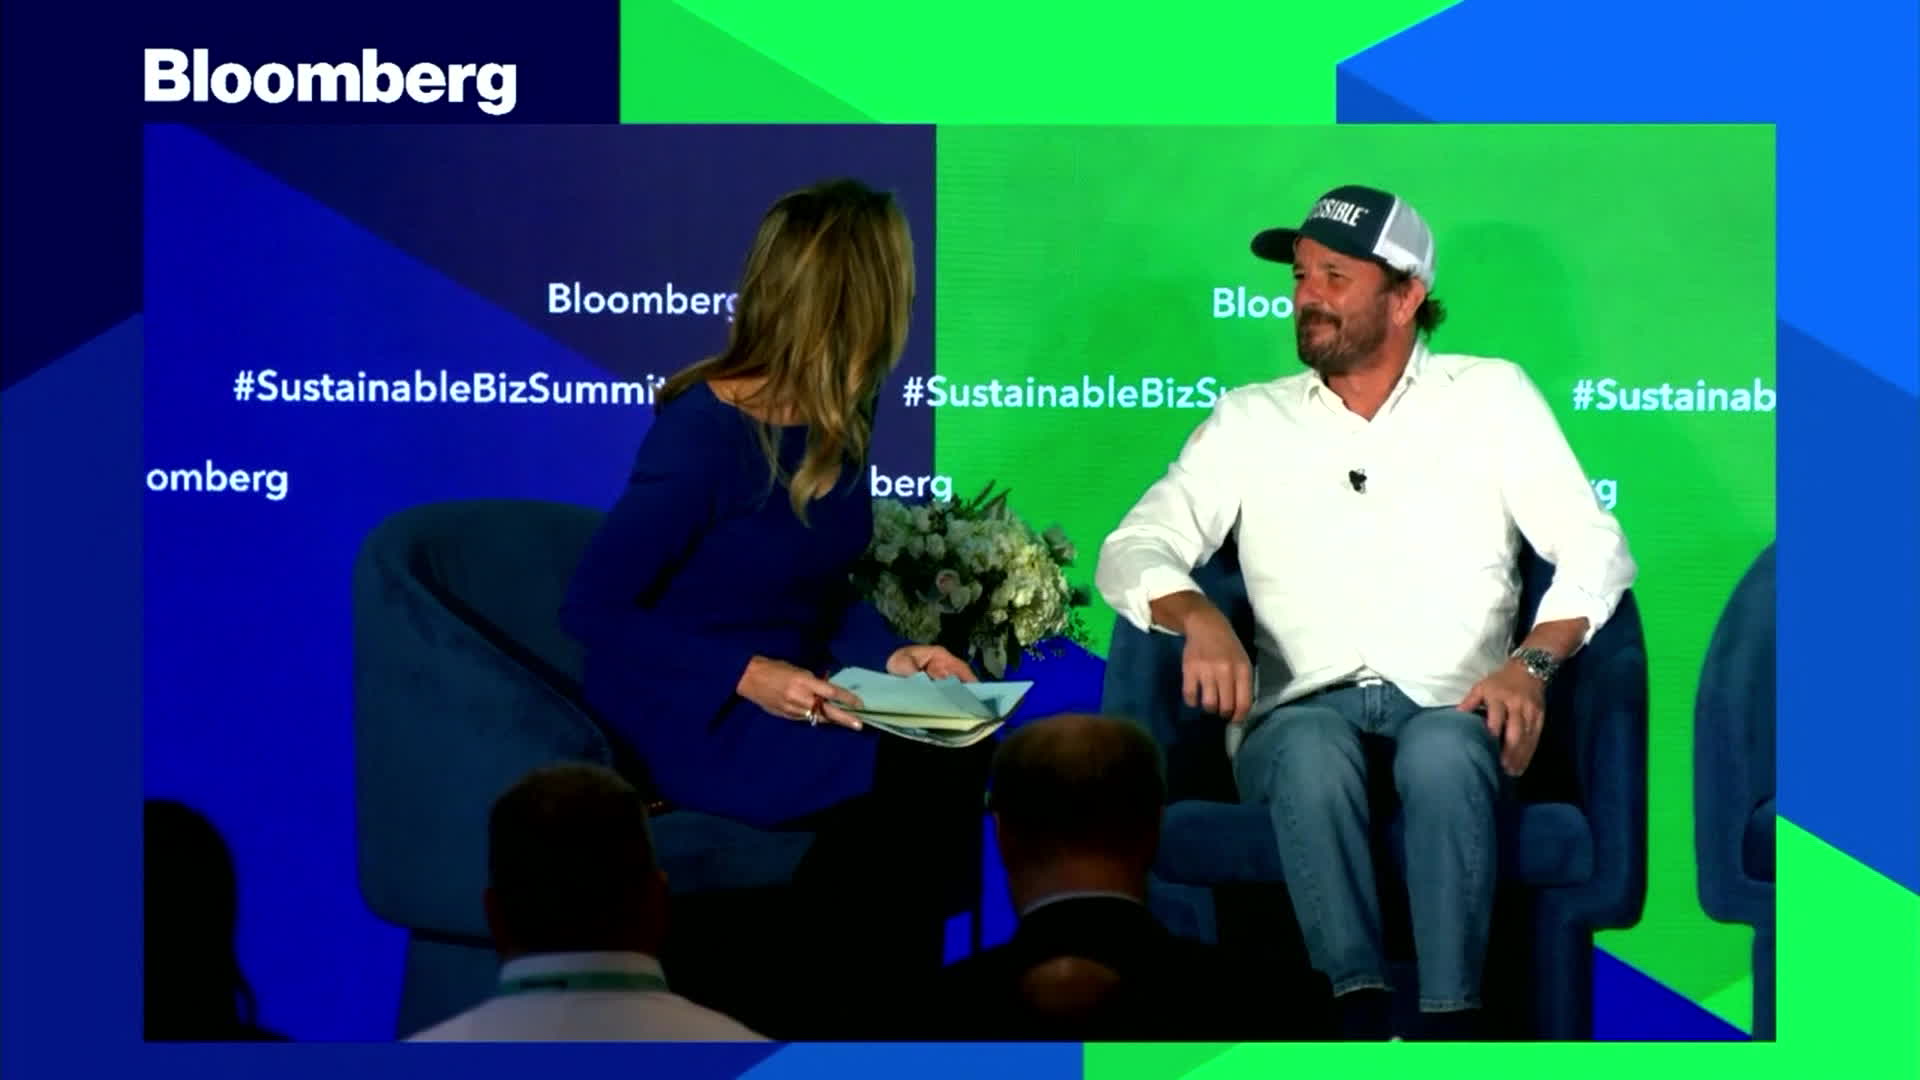 BLIVE: Bloomberg Sustainable Business Summit, Impossible Foods CEO on Food, Tech & Sustainability